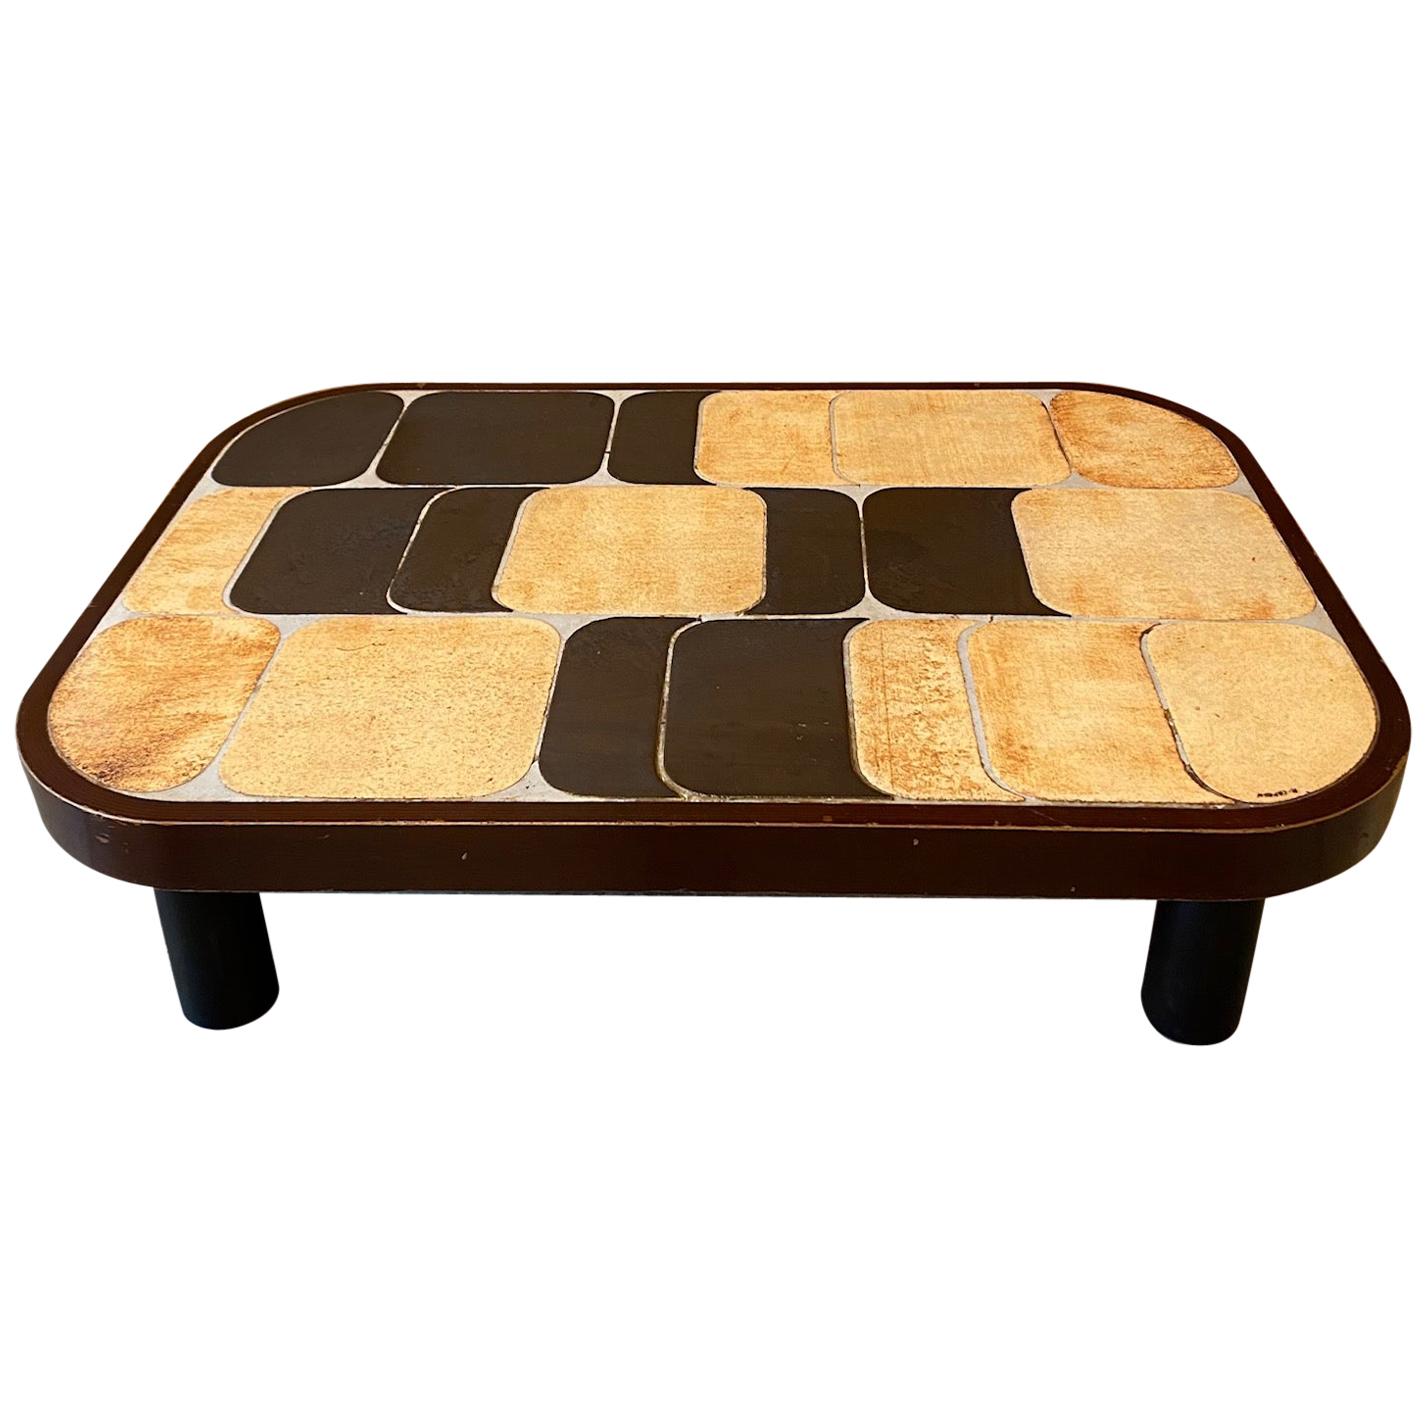 "Shogun" Ceramic Coffee Table by Roger Capron, France, 1960s